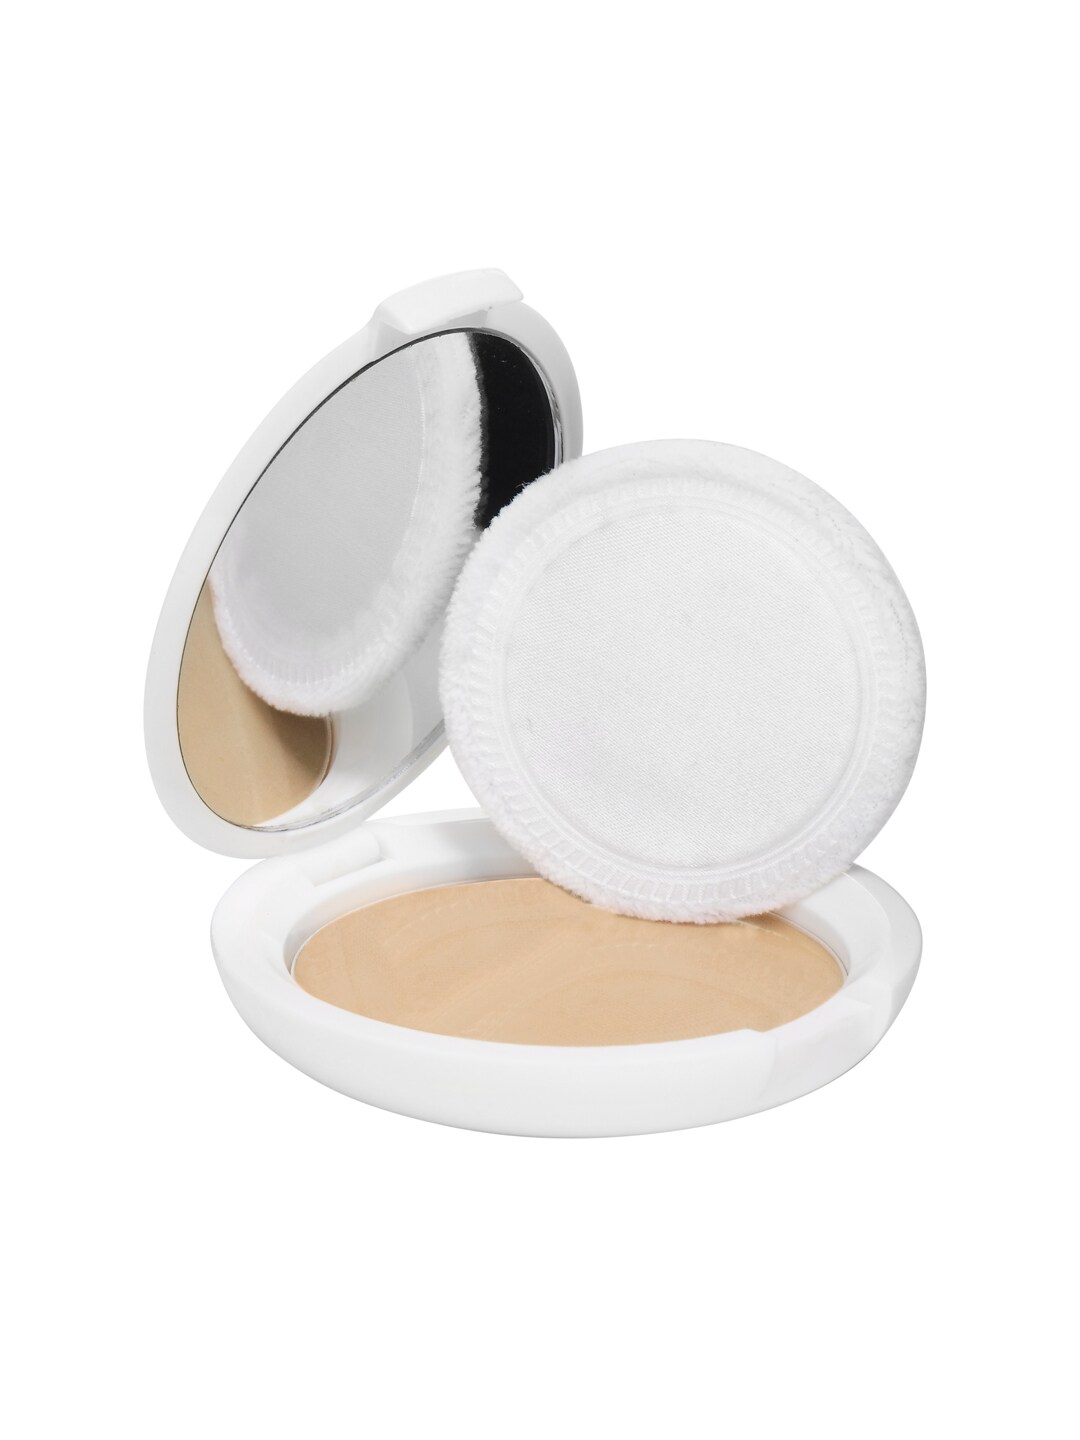 ColorBar Radiant White UV Fairness Shell Compact 002